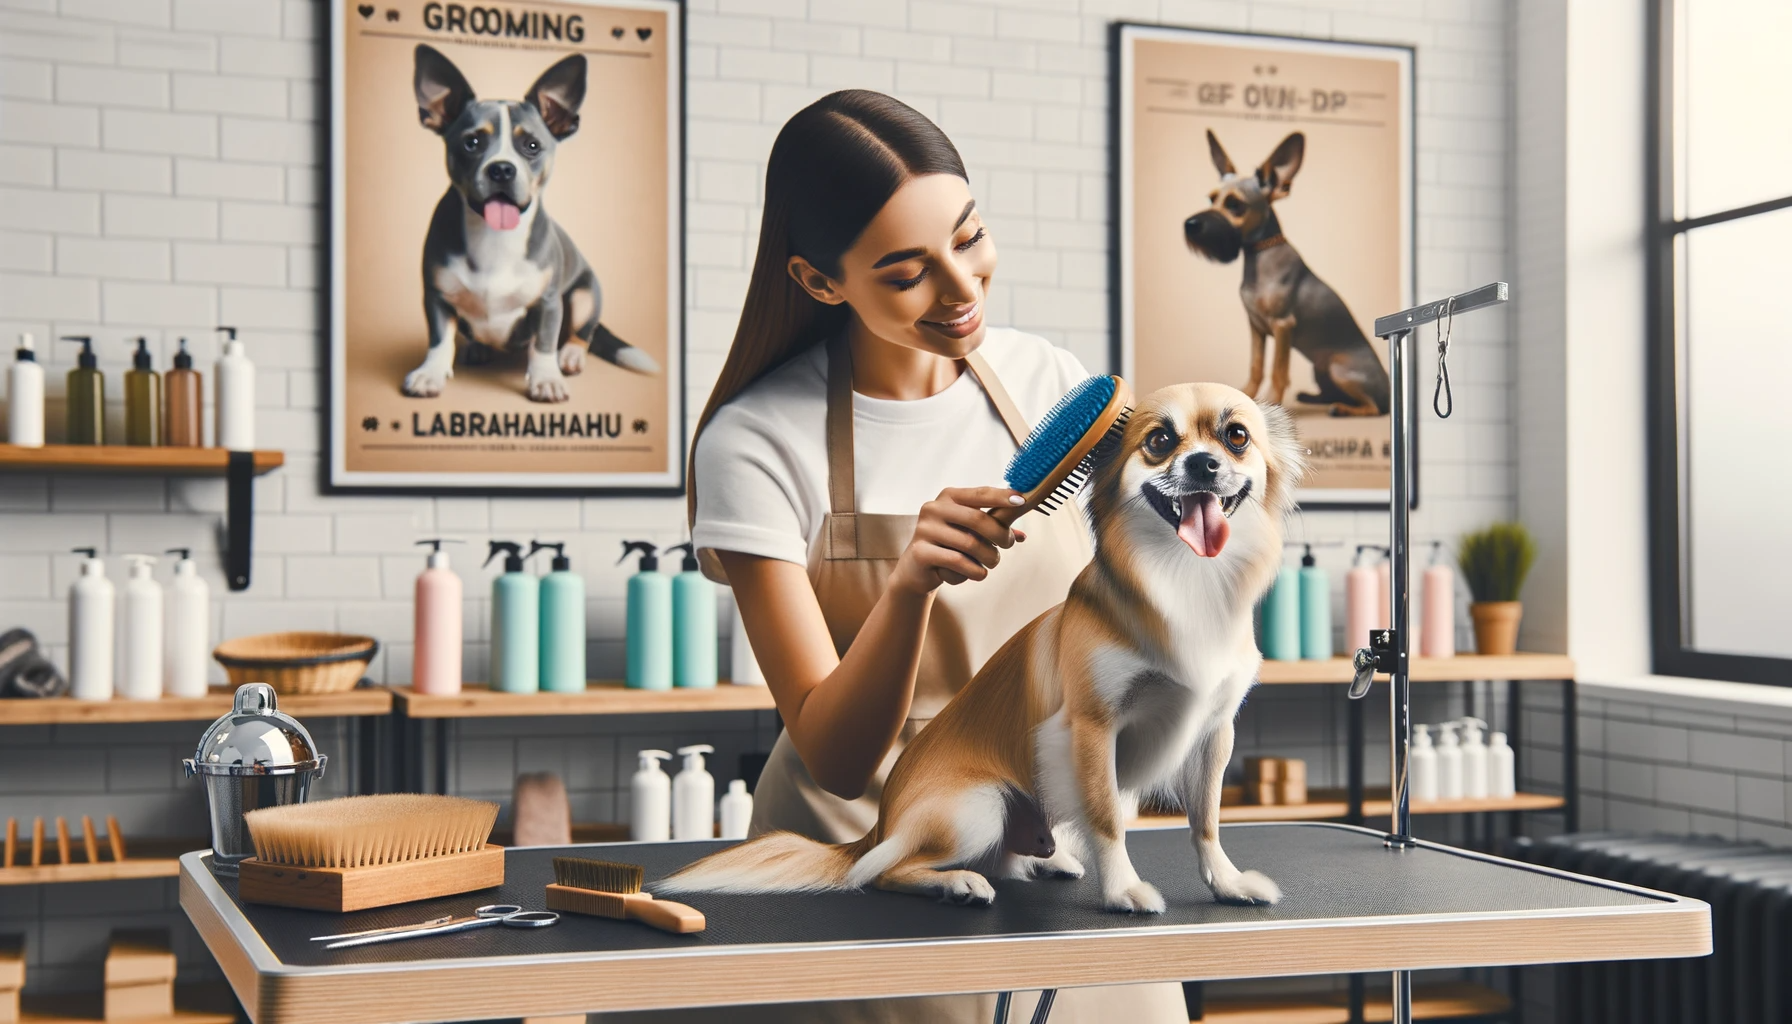 A Labrahuahua being pampered in a grooming salon, illustrating the self-care lifestyle that suits this Chihuahua Lab mix